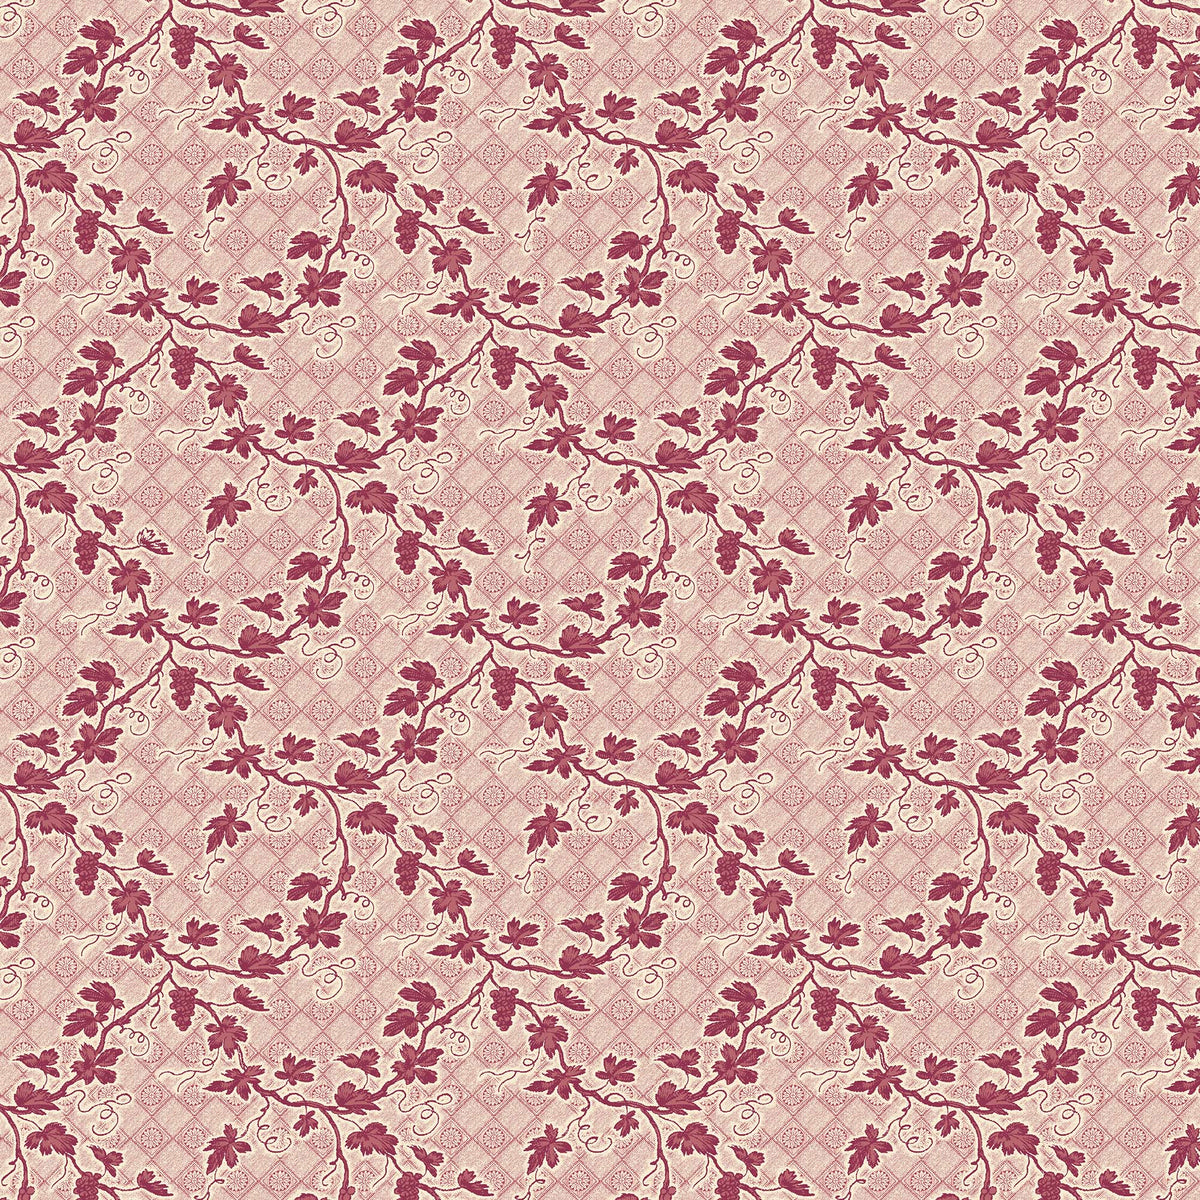 Toile Design Fabric - All Over Leaf Pink